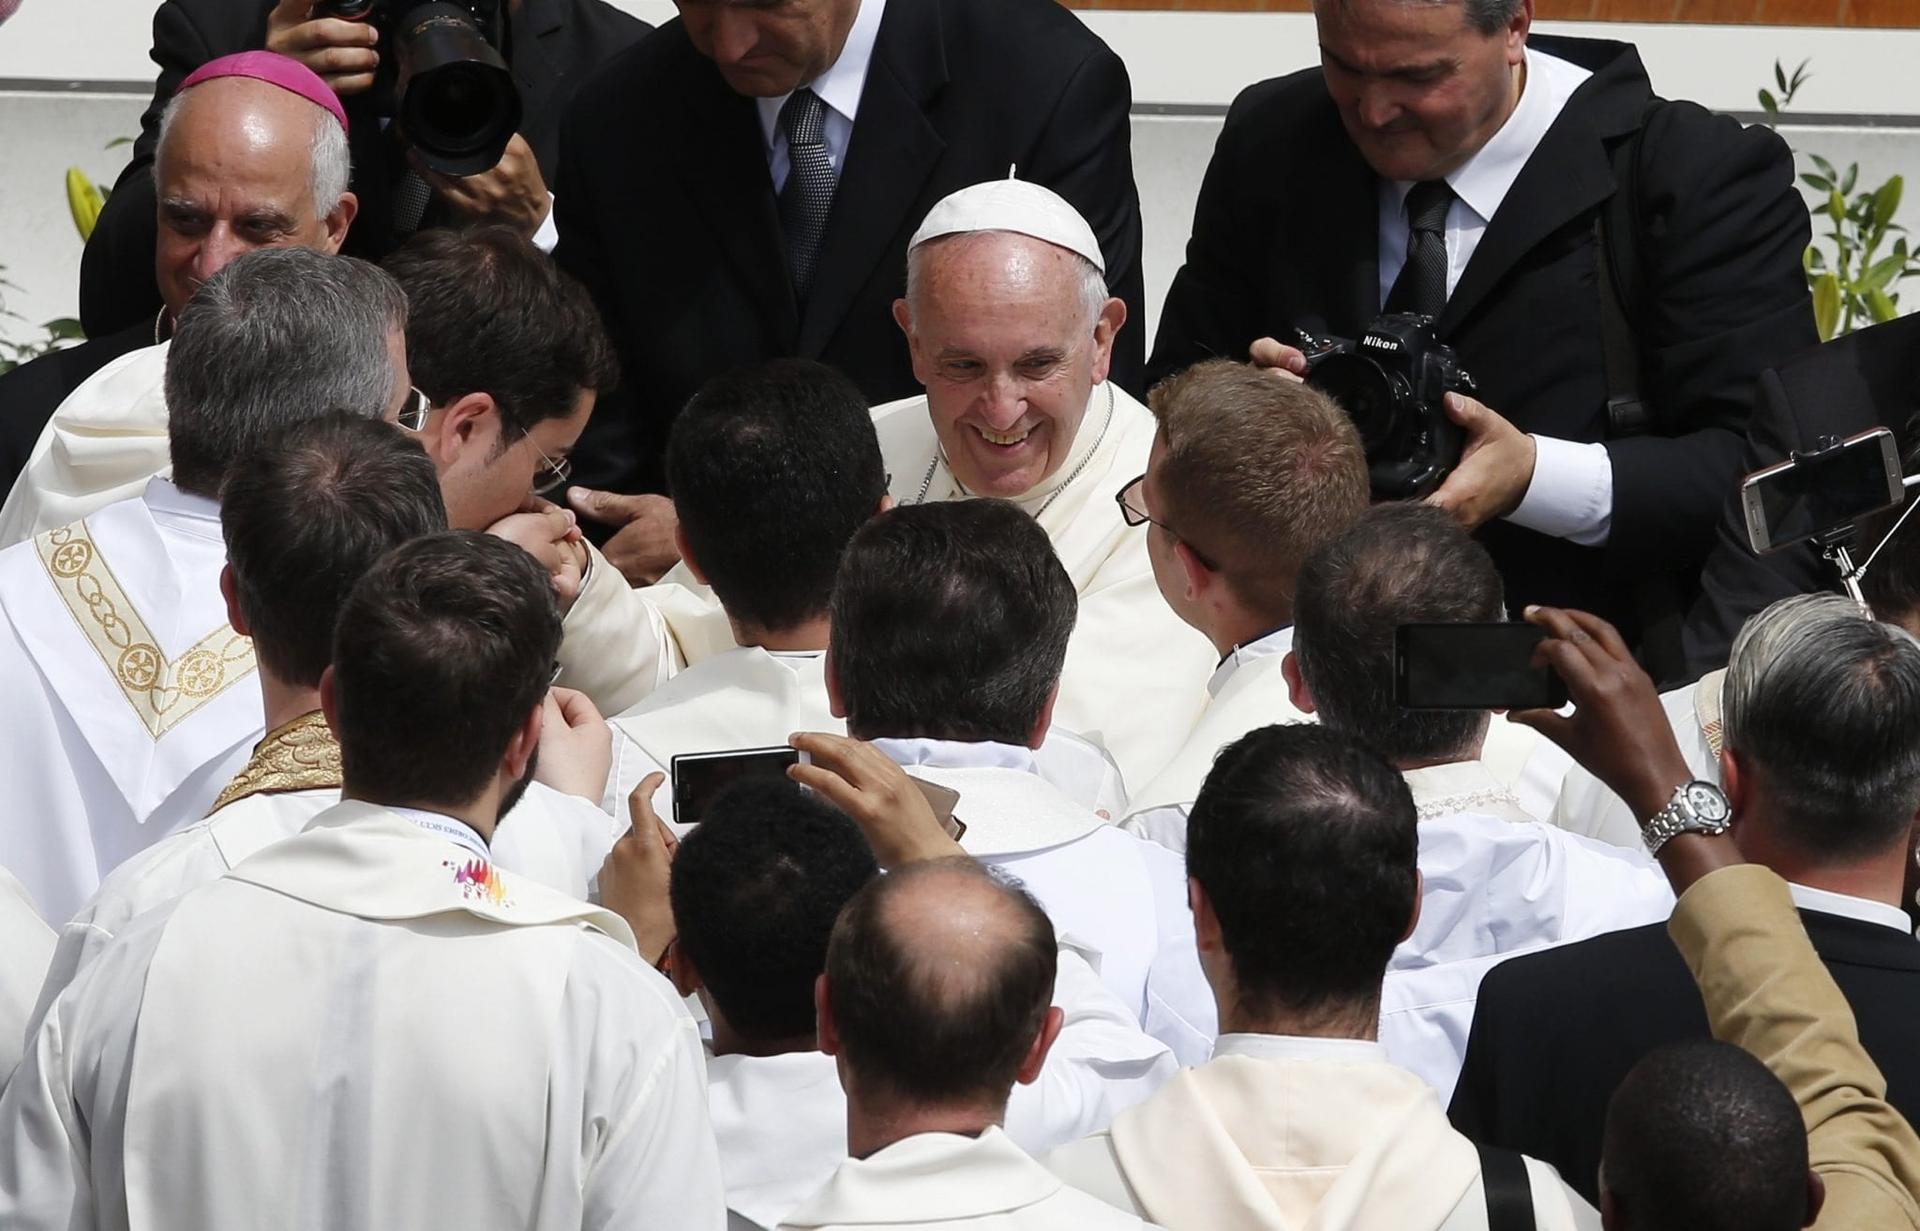 Pope to seminarians: Beware of the devil’s temptations, keep a sense of humor